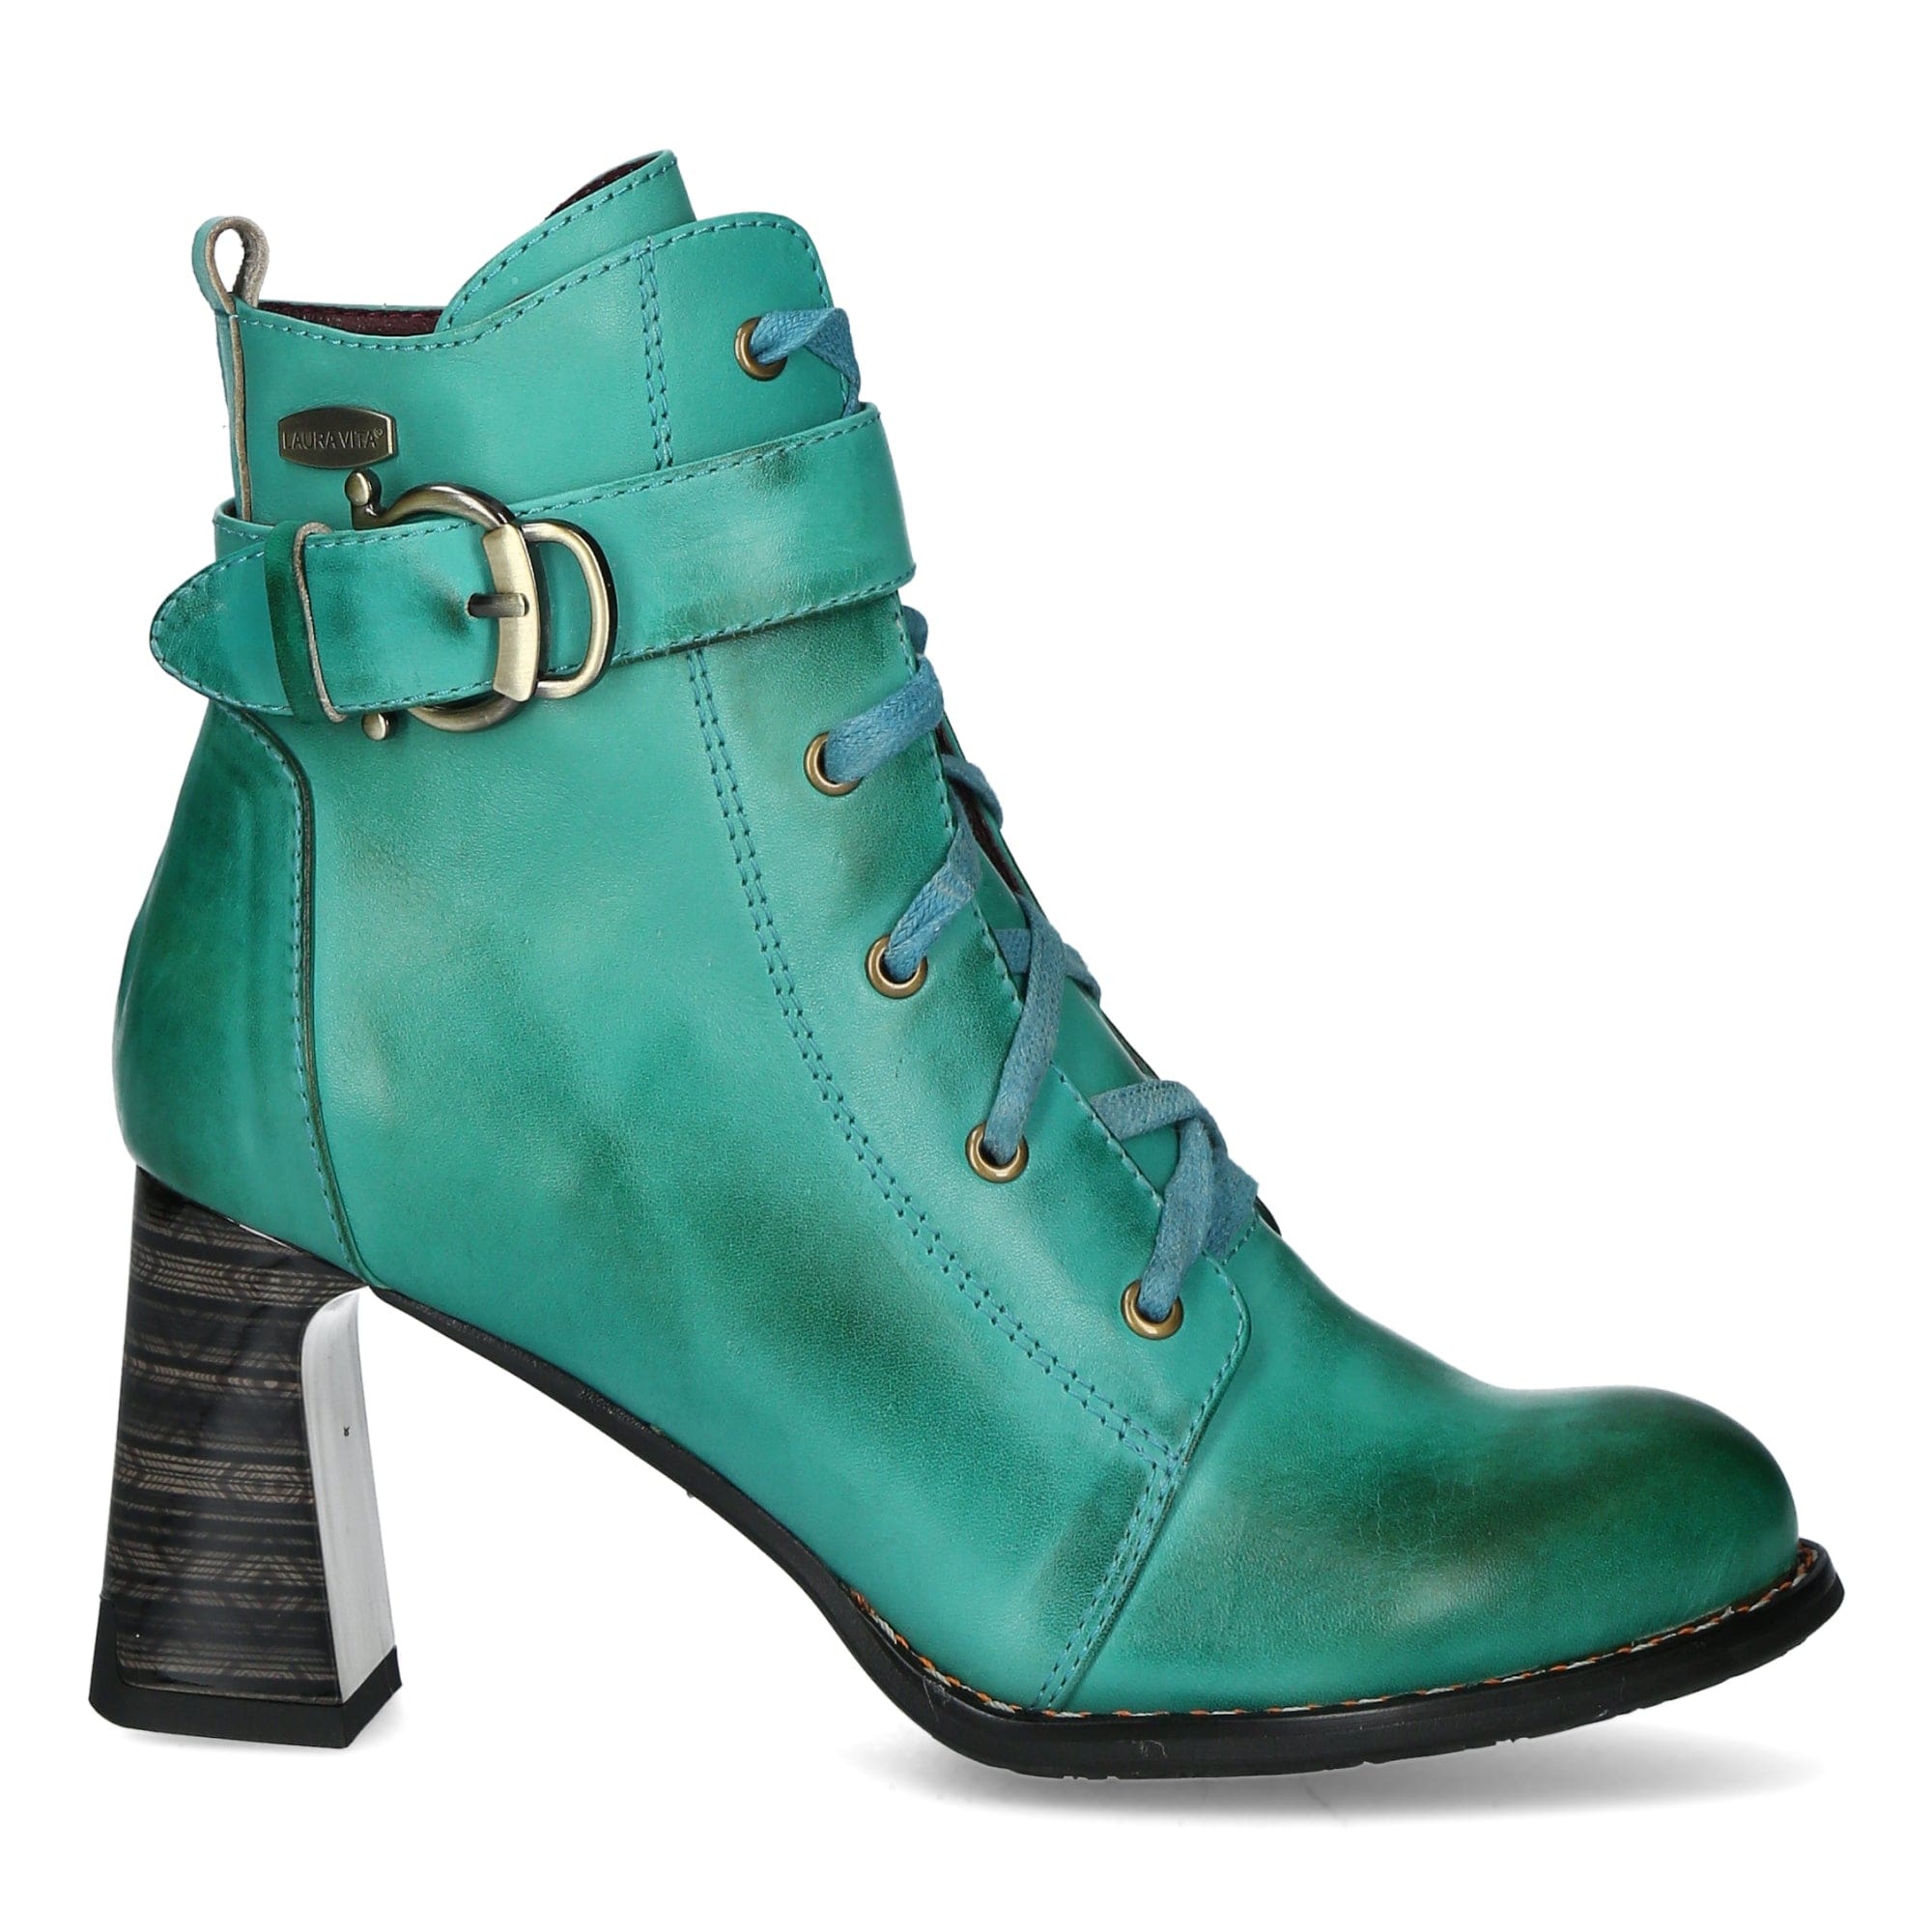 MAELEO 03A - 36 / Turquoise - Boots